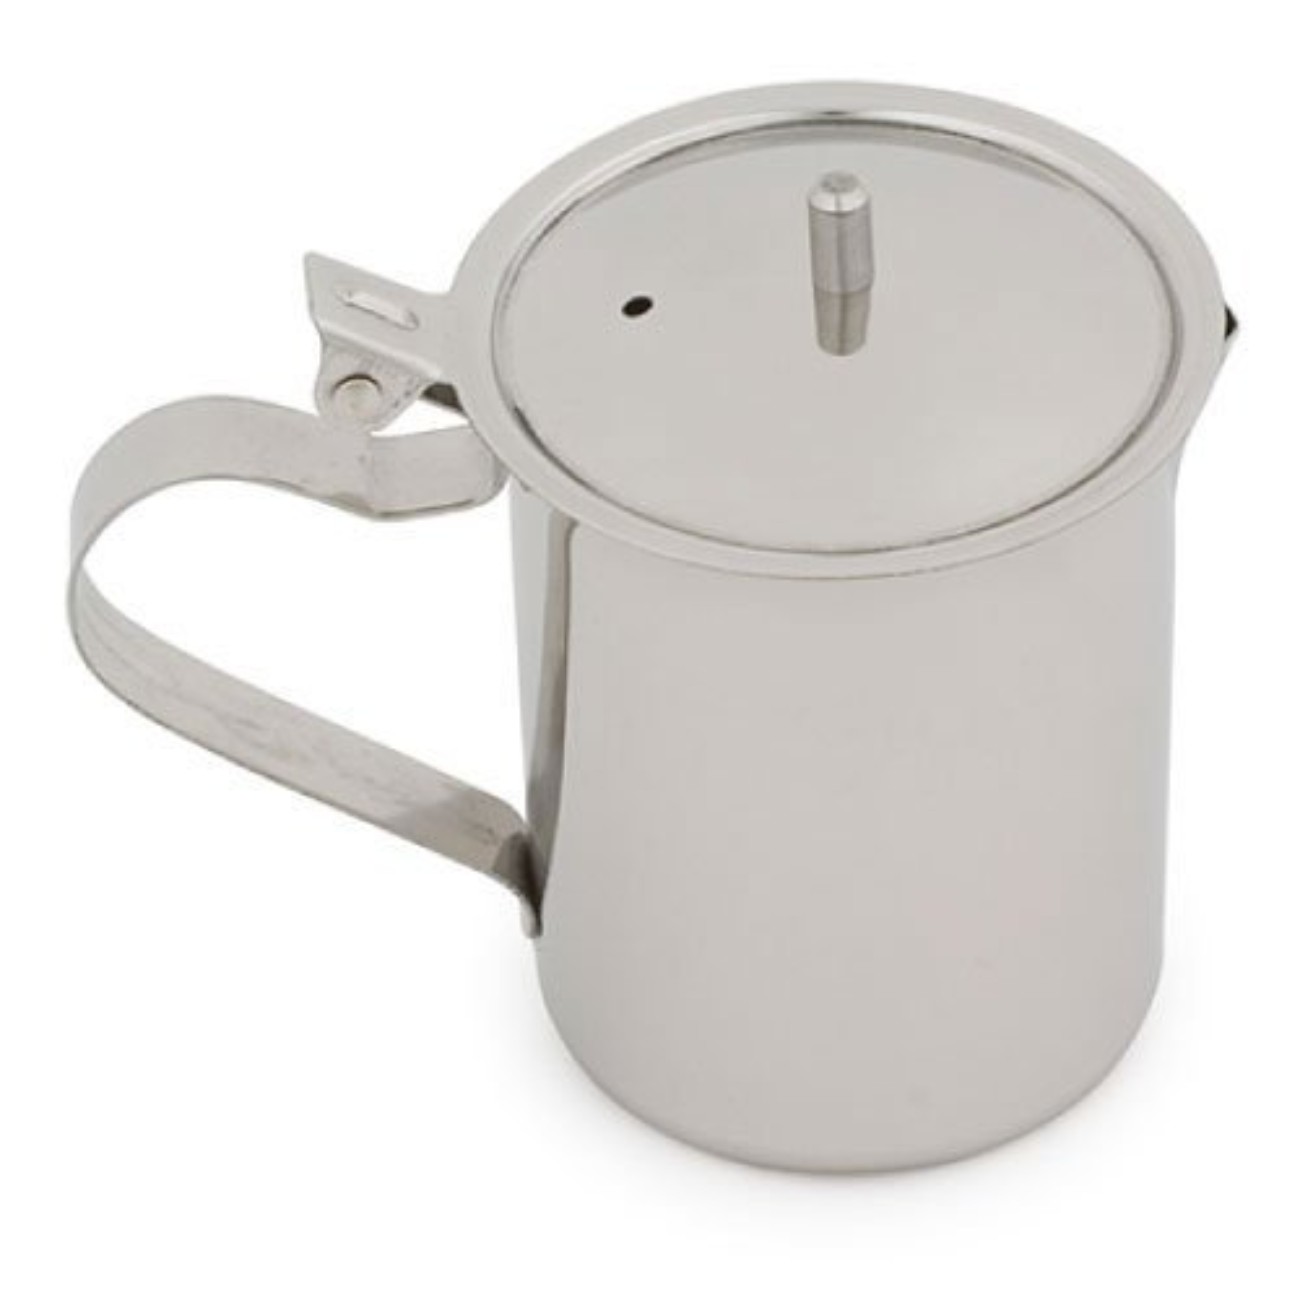 Stainless Steel Drink Ware Economical Server Tea Or Other Hot Drinks For Kitchen